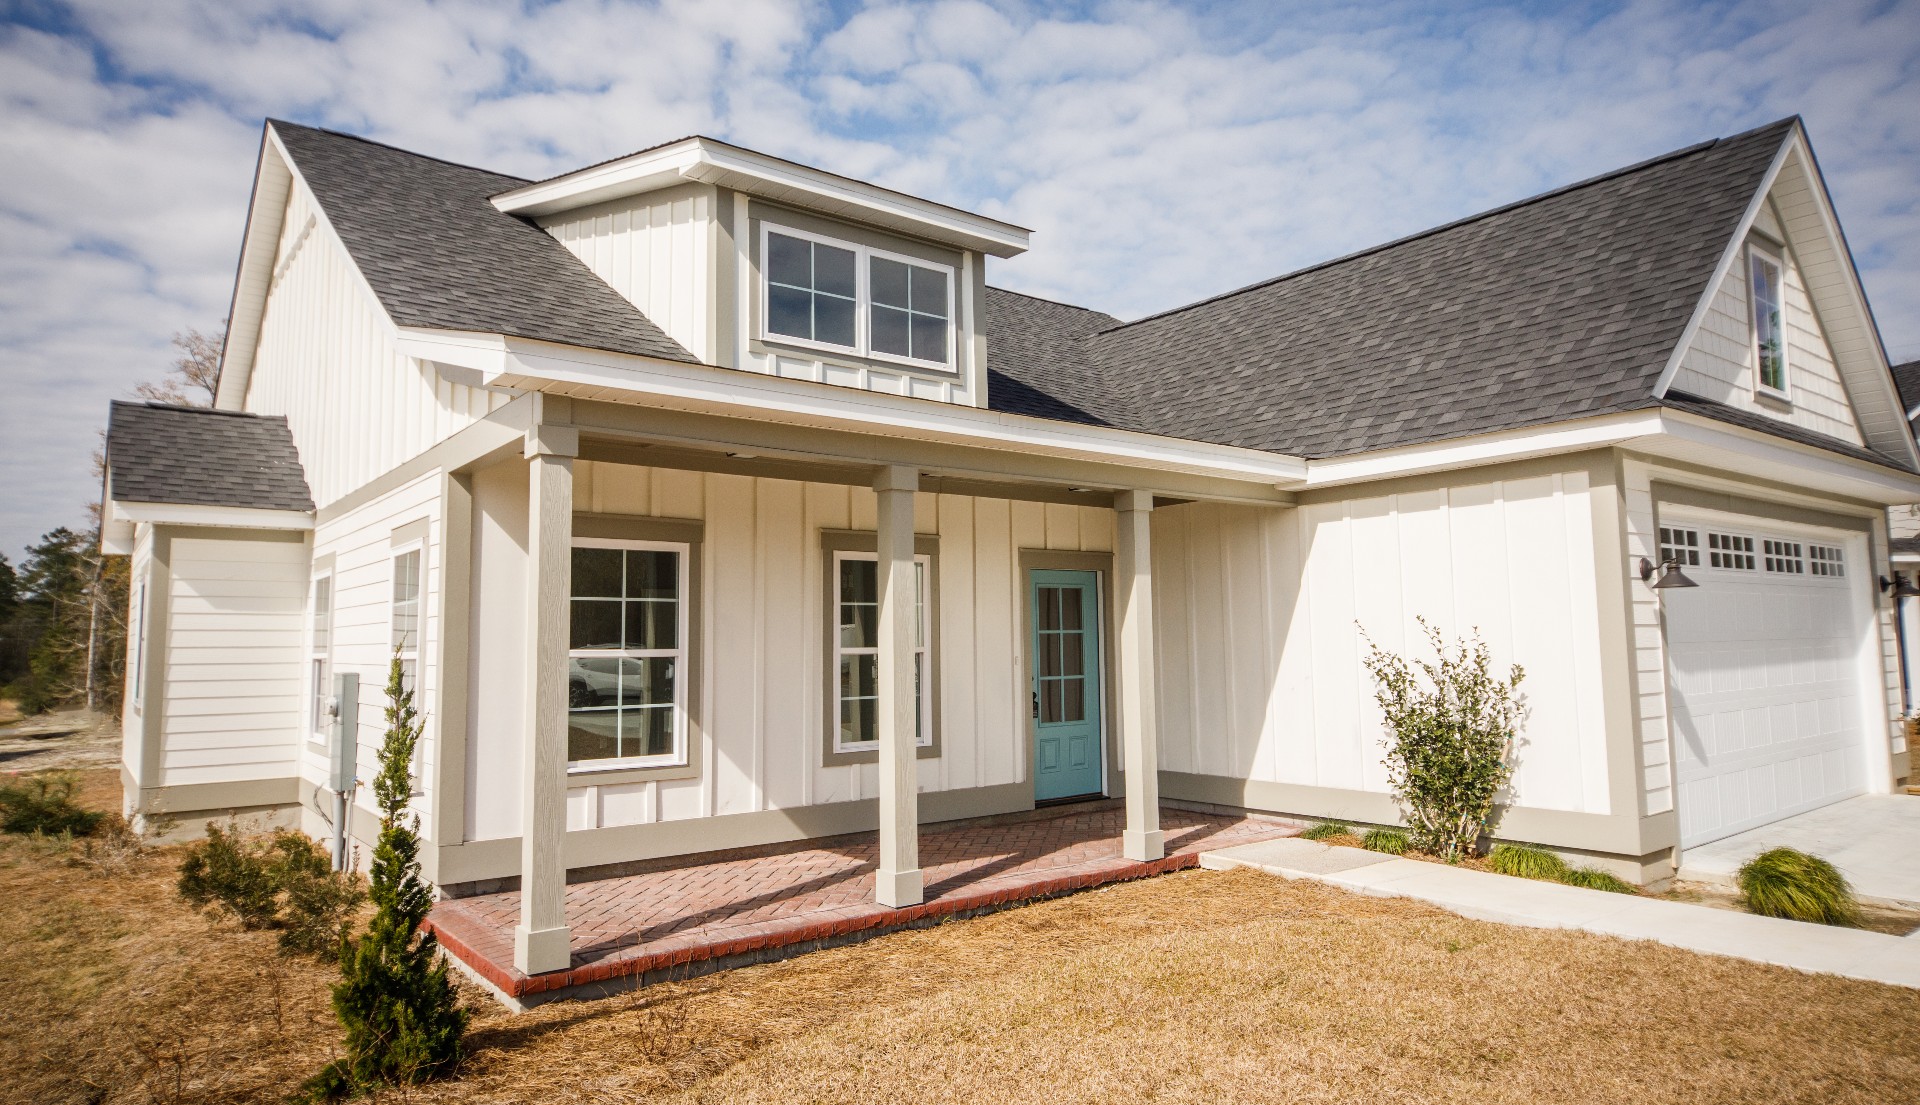 13 Benefits of Choosing James Hardie Siding for Your Home